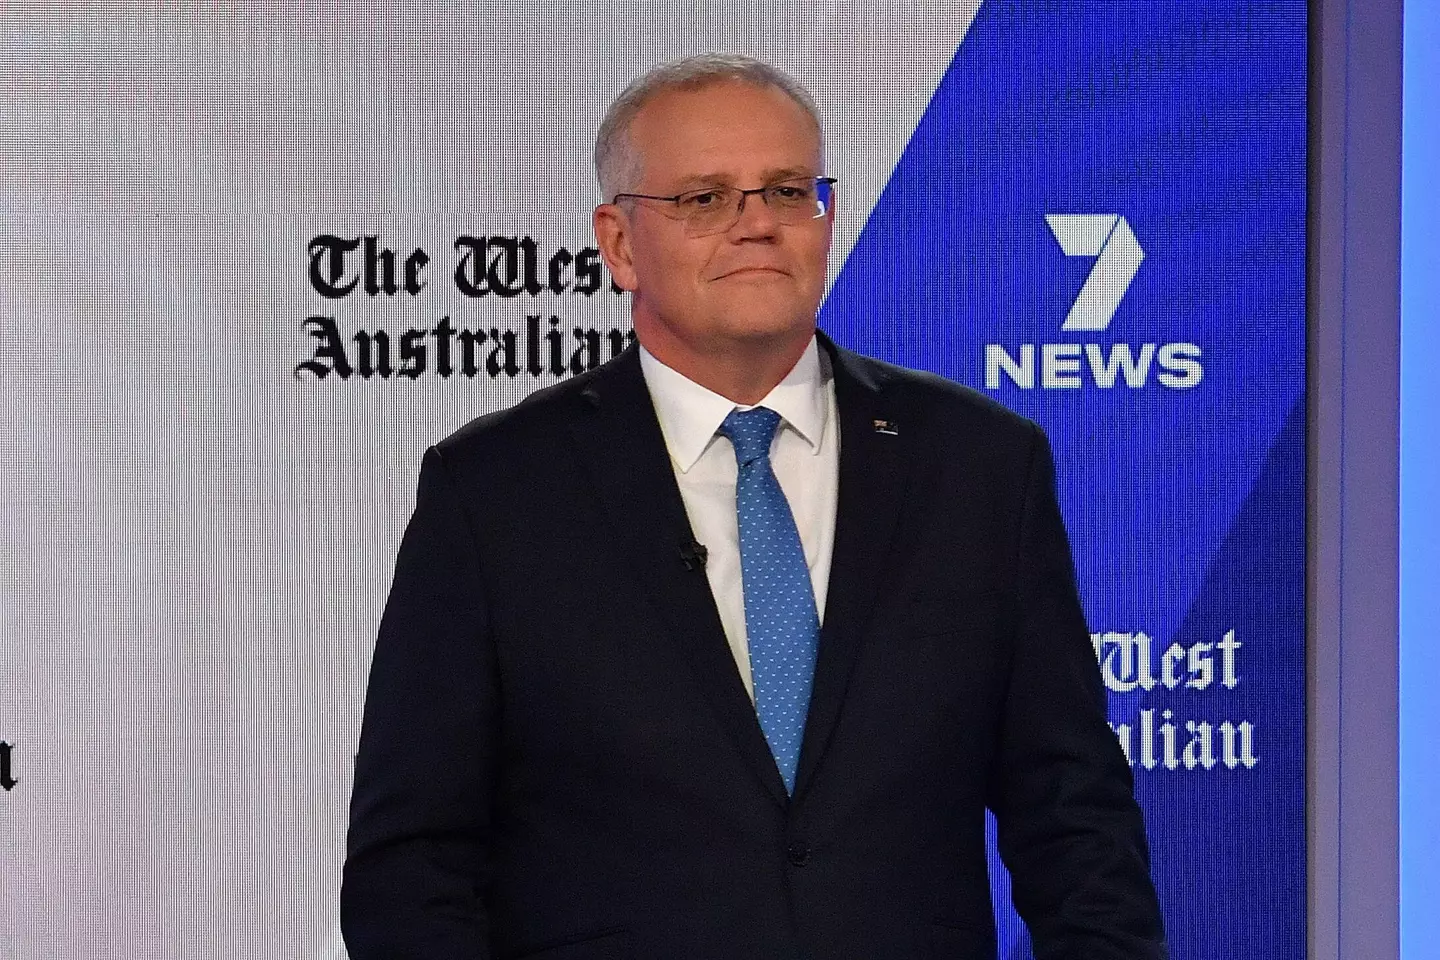 Scott Morrison is hoping to be re-elected in Australia's general election.